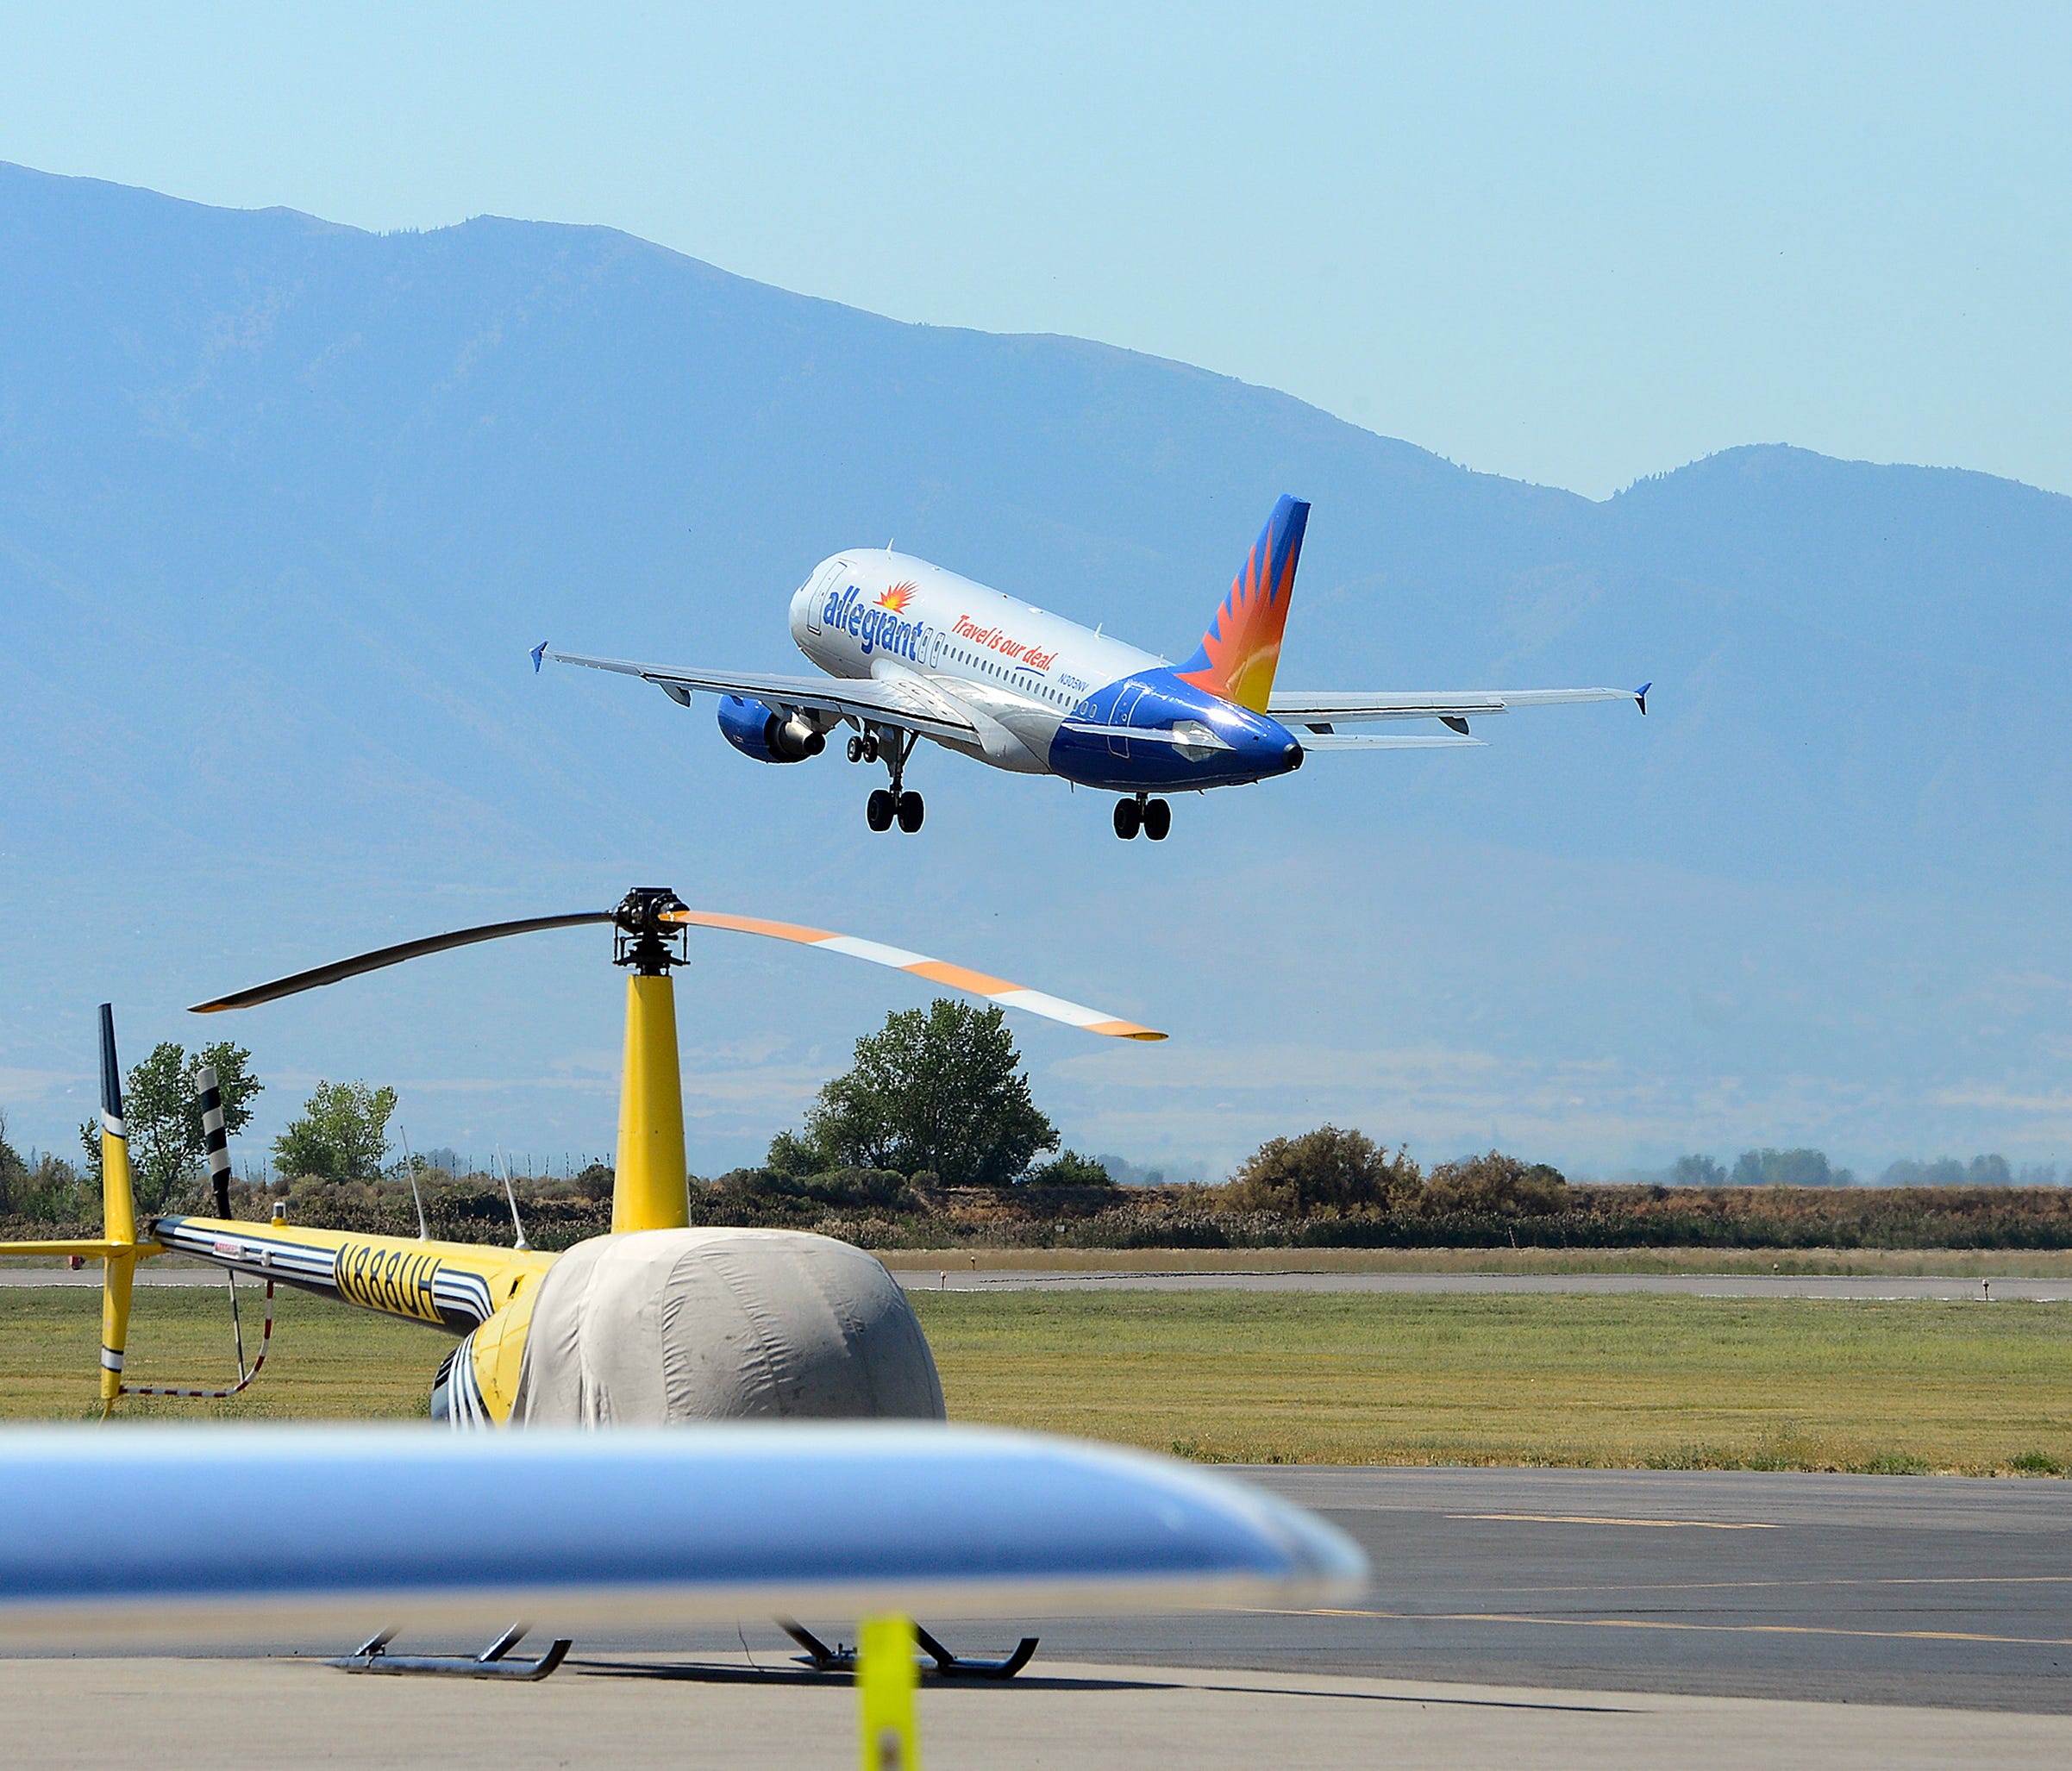 An Allegiant Air flight takes off from the Provo Airport in Utah on Aug. 31, 2016.